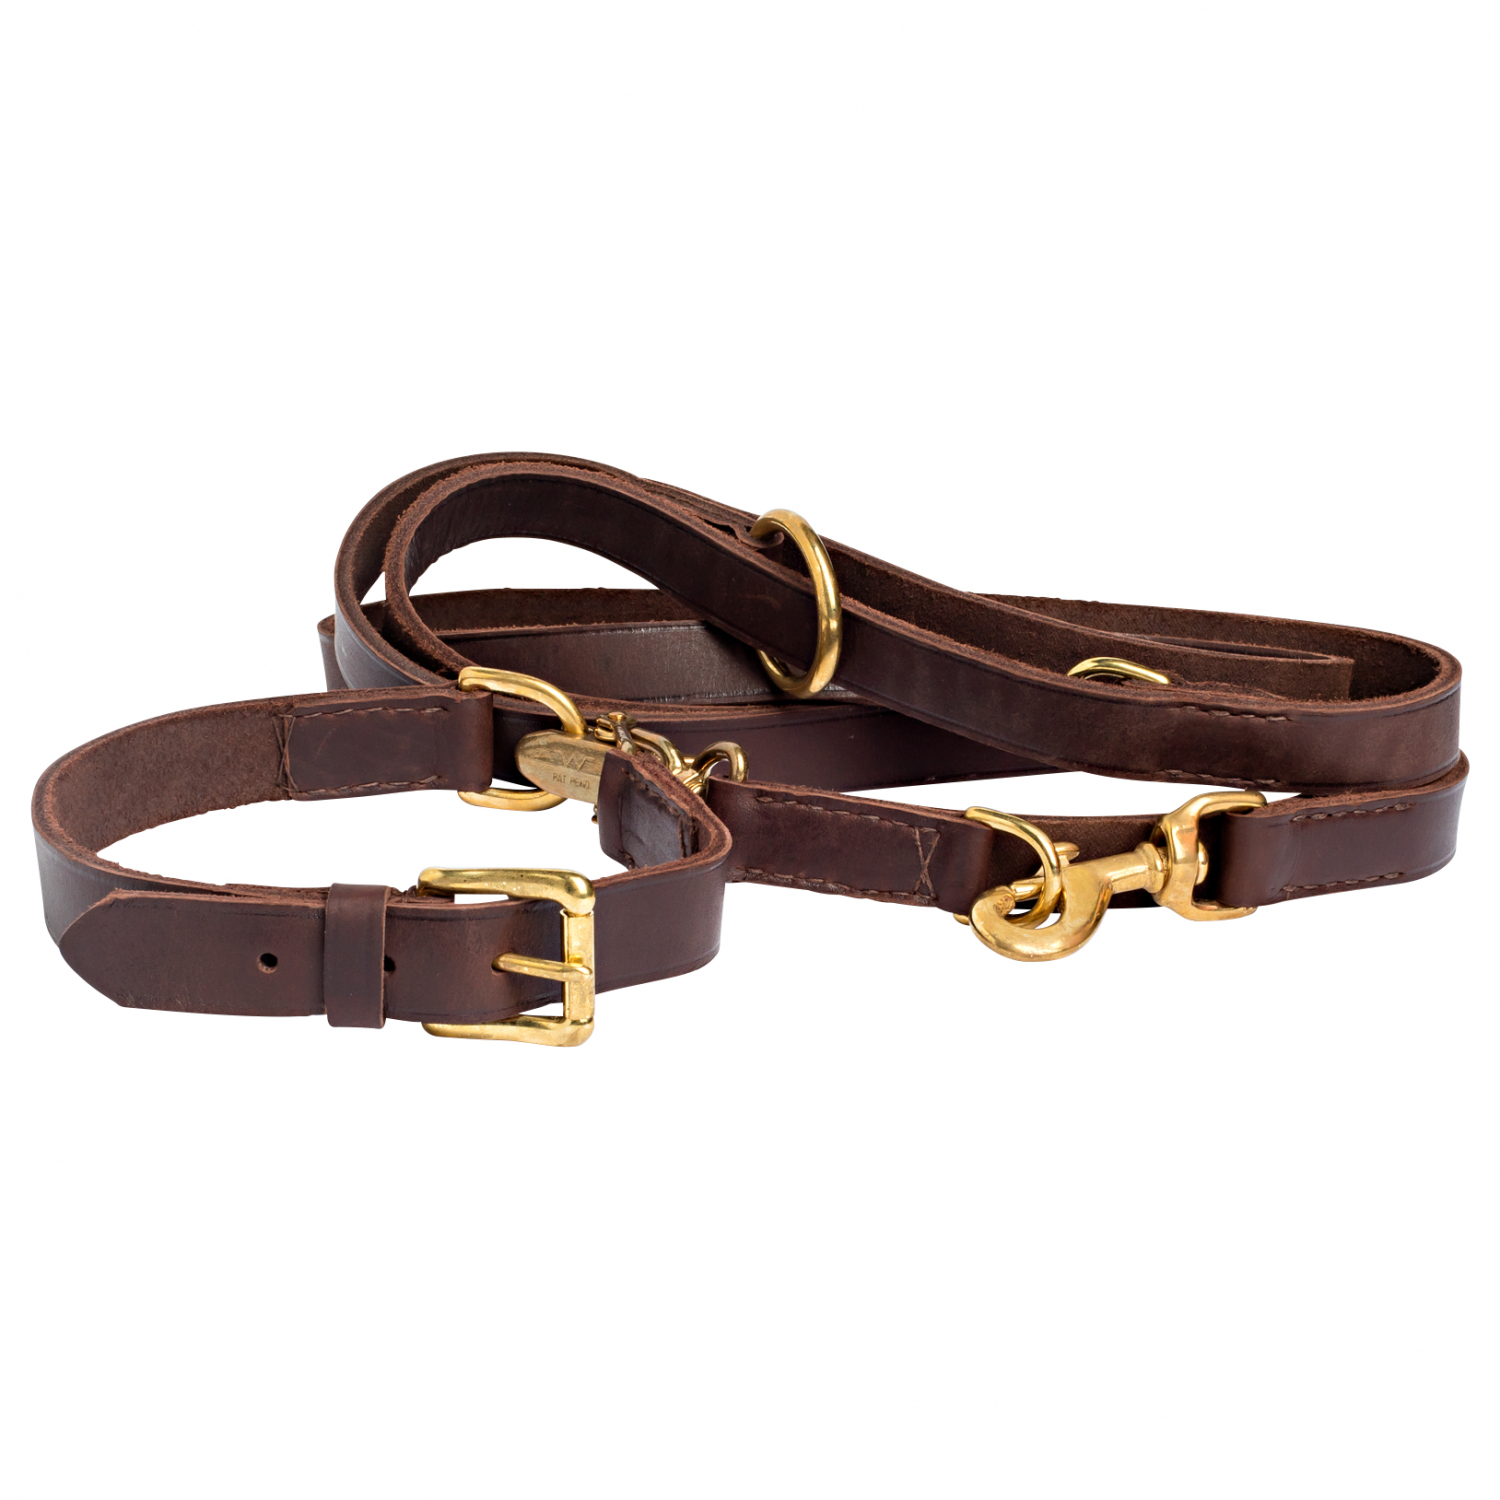 heim Luxury Soft Leather Neck Collar at low prices